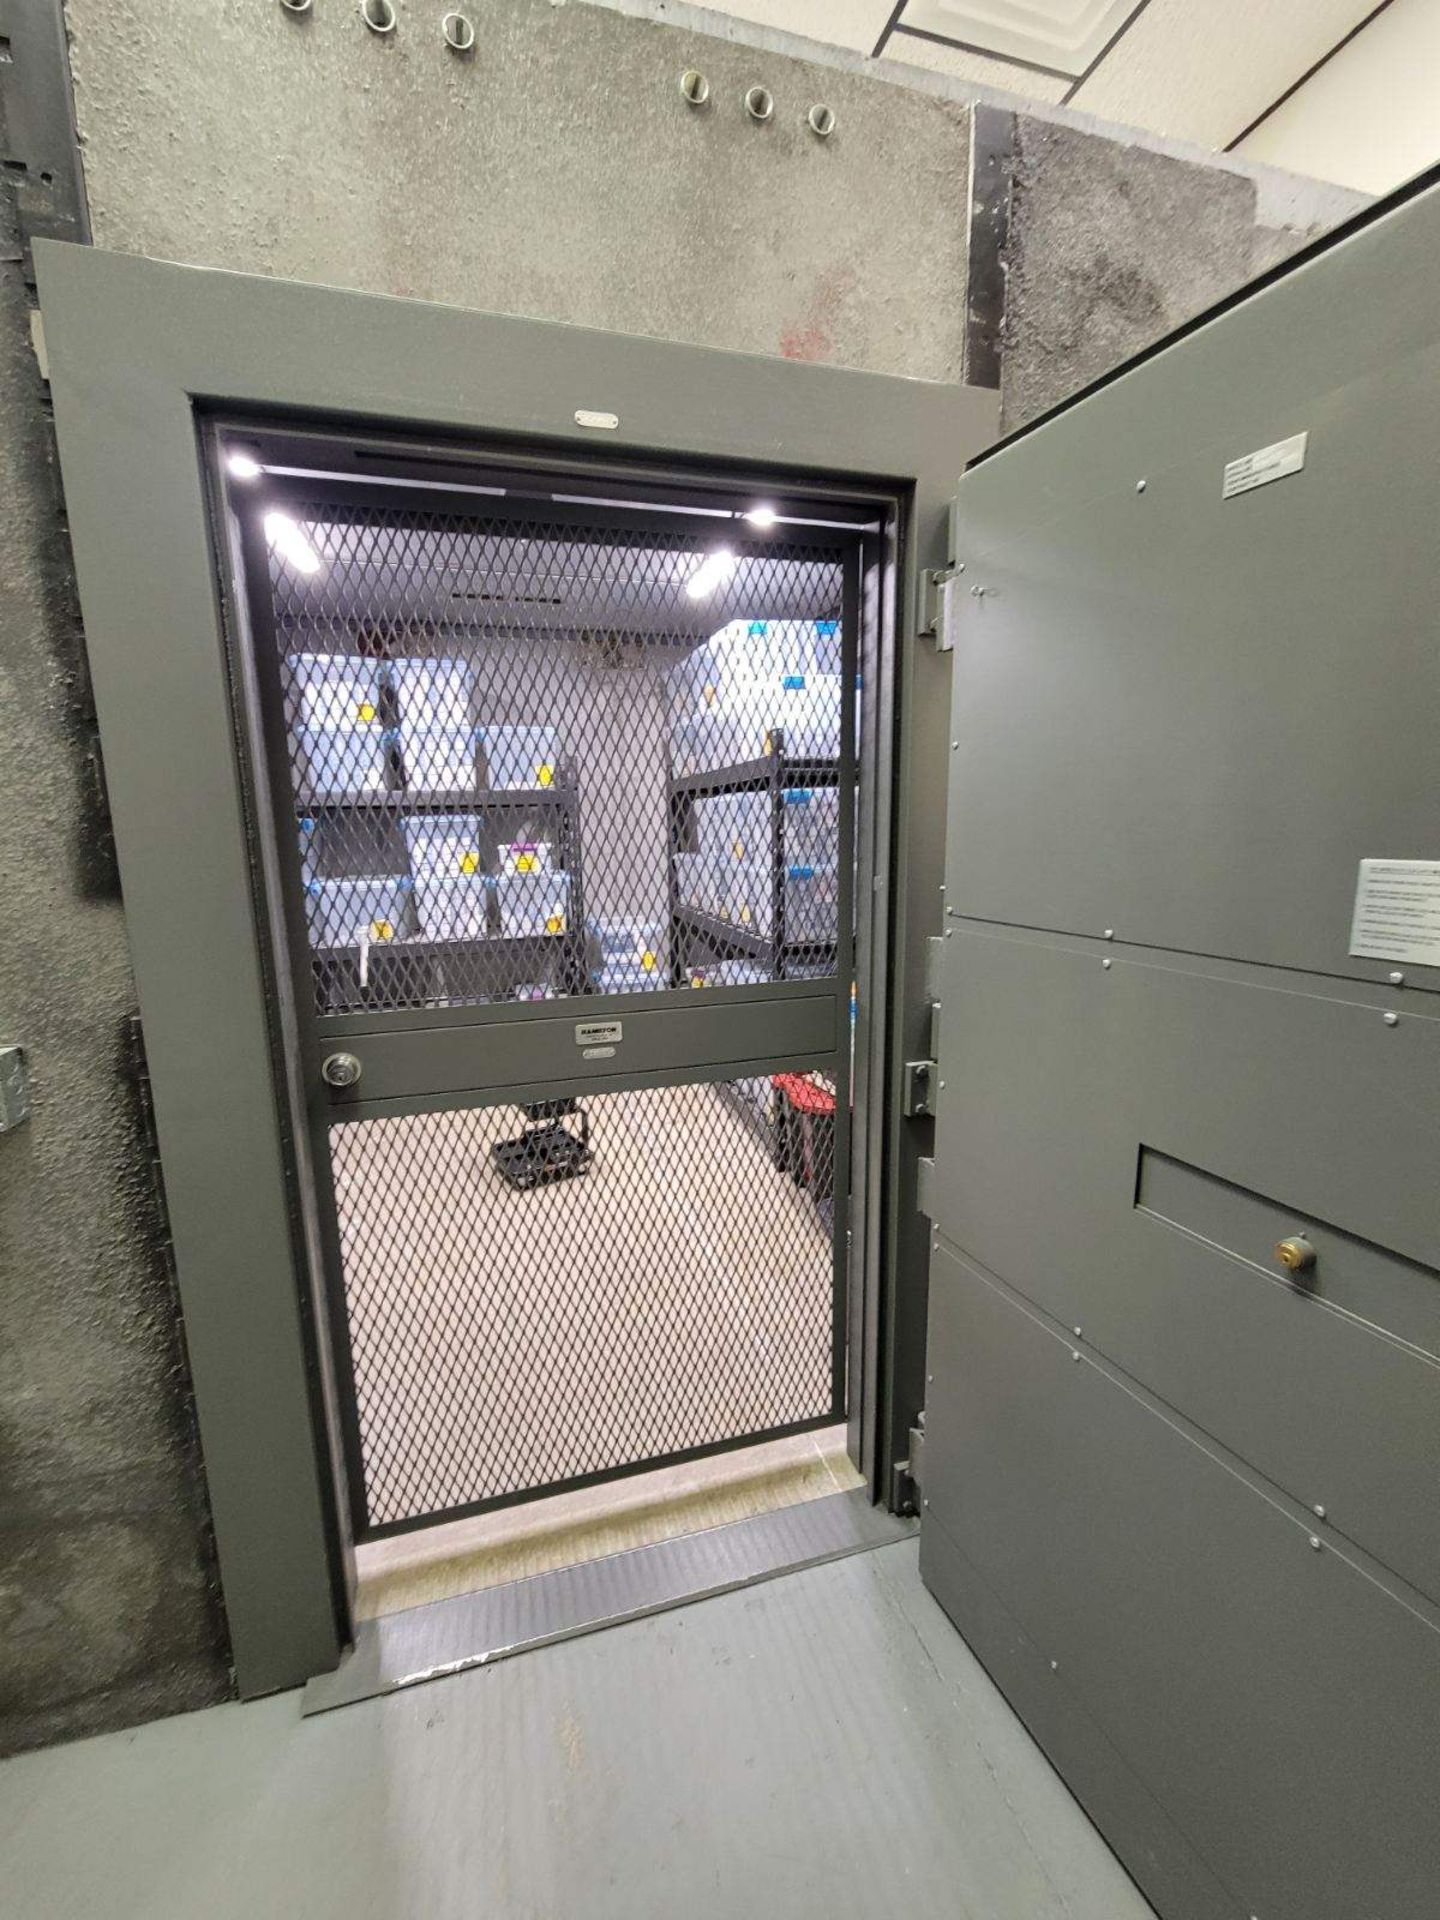 Used Hamilton Class-5 Security Bank Modular Vault w/ Ceiling. OAD: 145" L/D x 145" x 106" H - Image 3 of 5